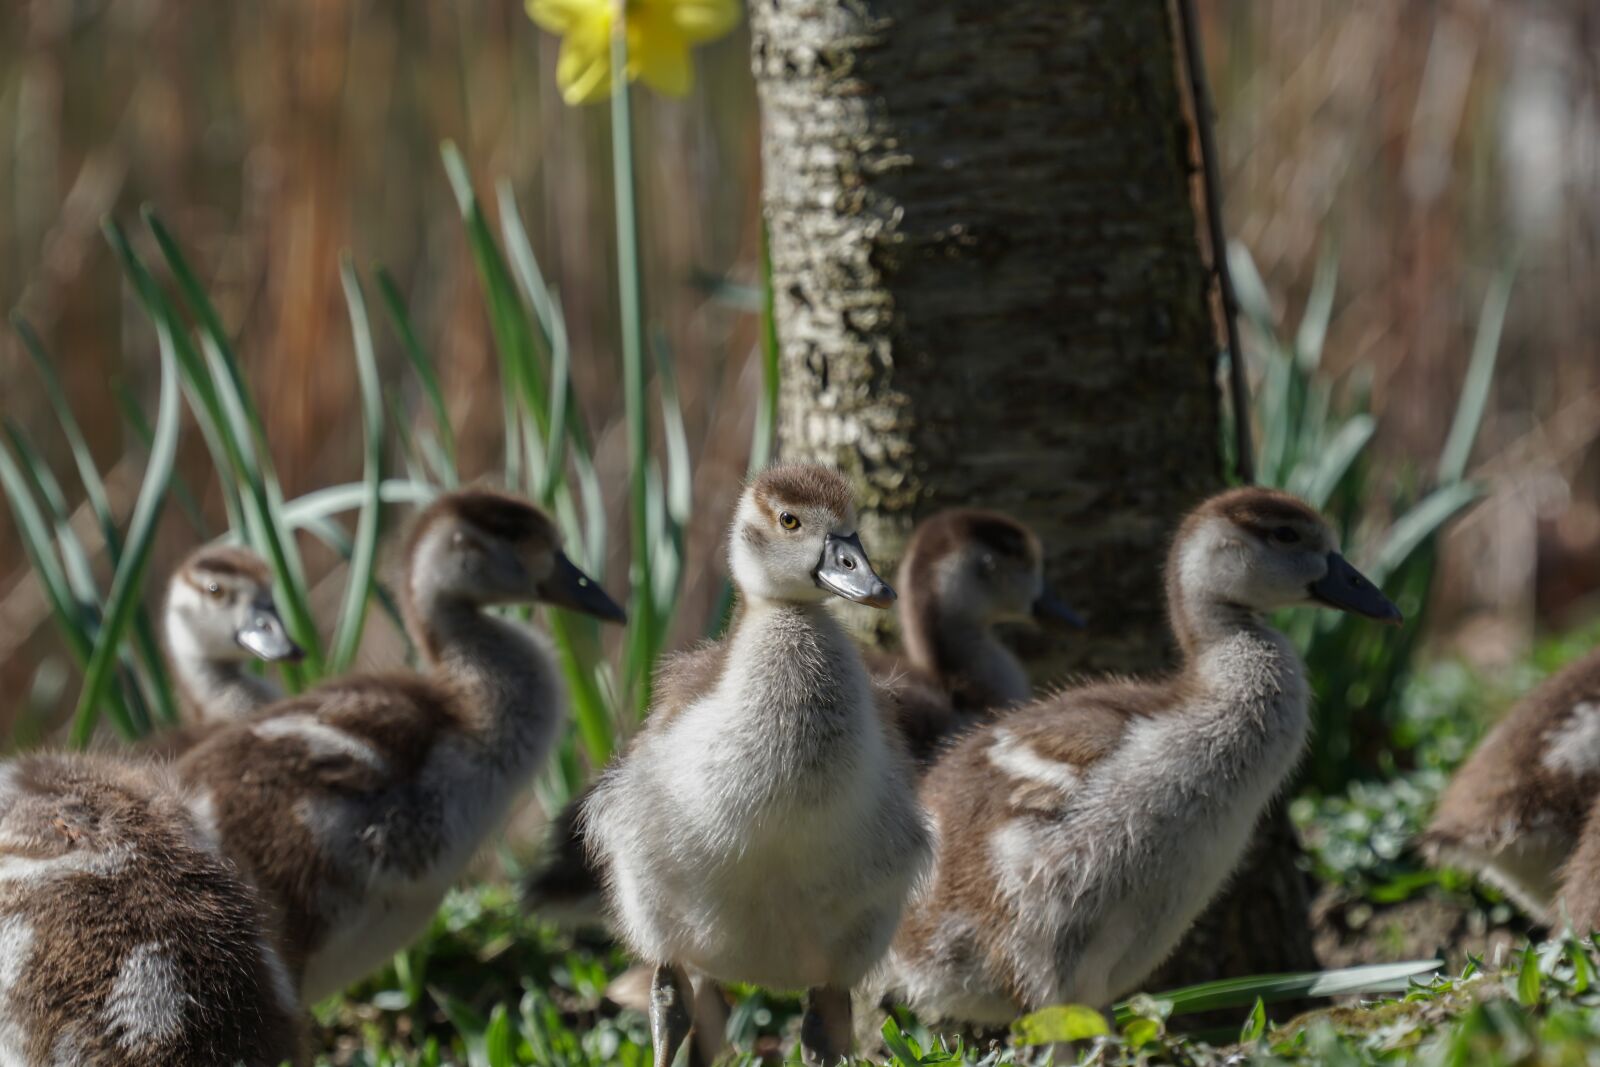 Sony a6500 sample photo. Ducklings, duck family, easter photography